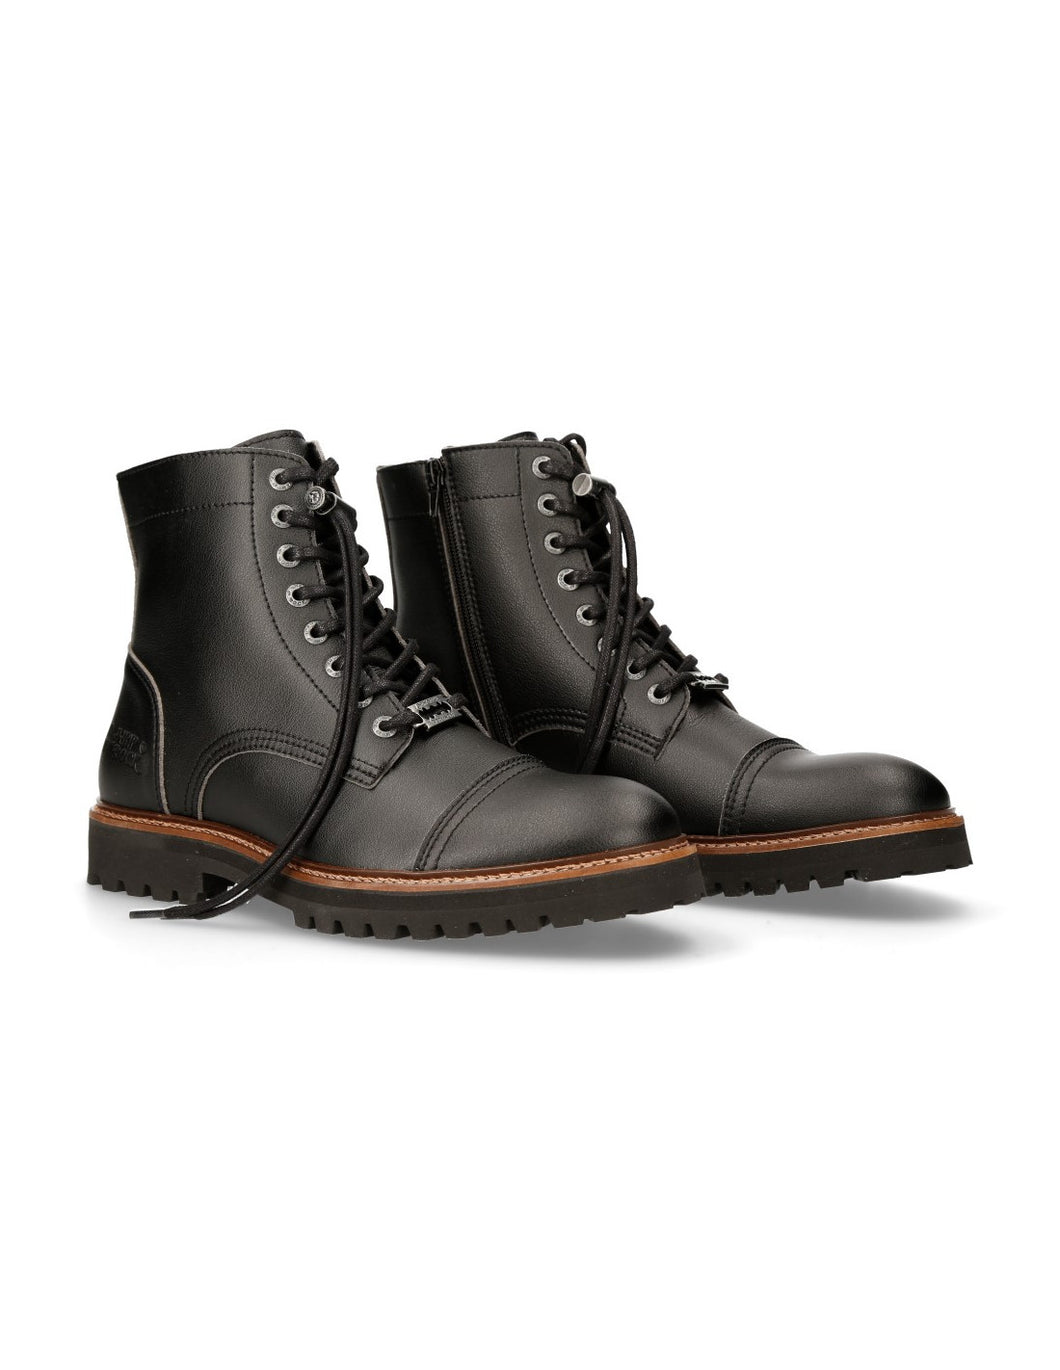 New Rock M-MONTAGNA002-S1 Boots Shoes Real Leather Black